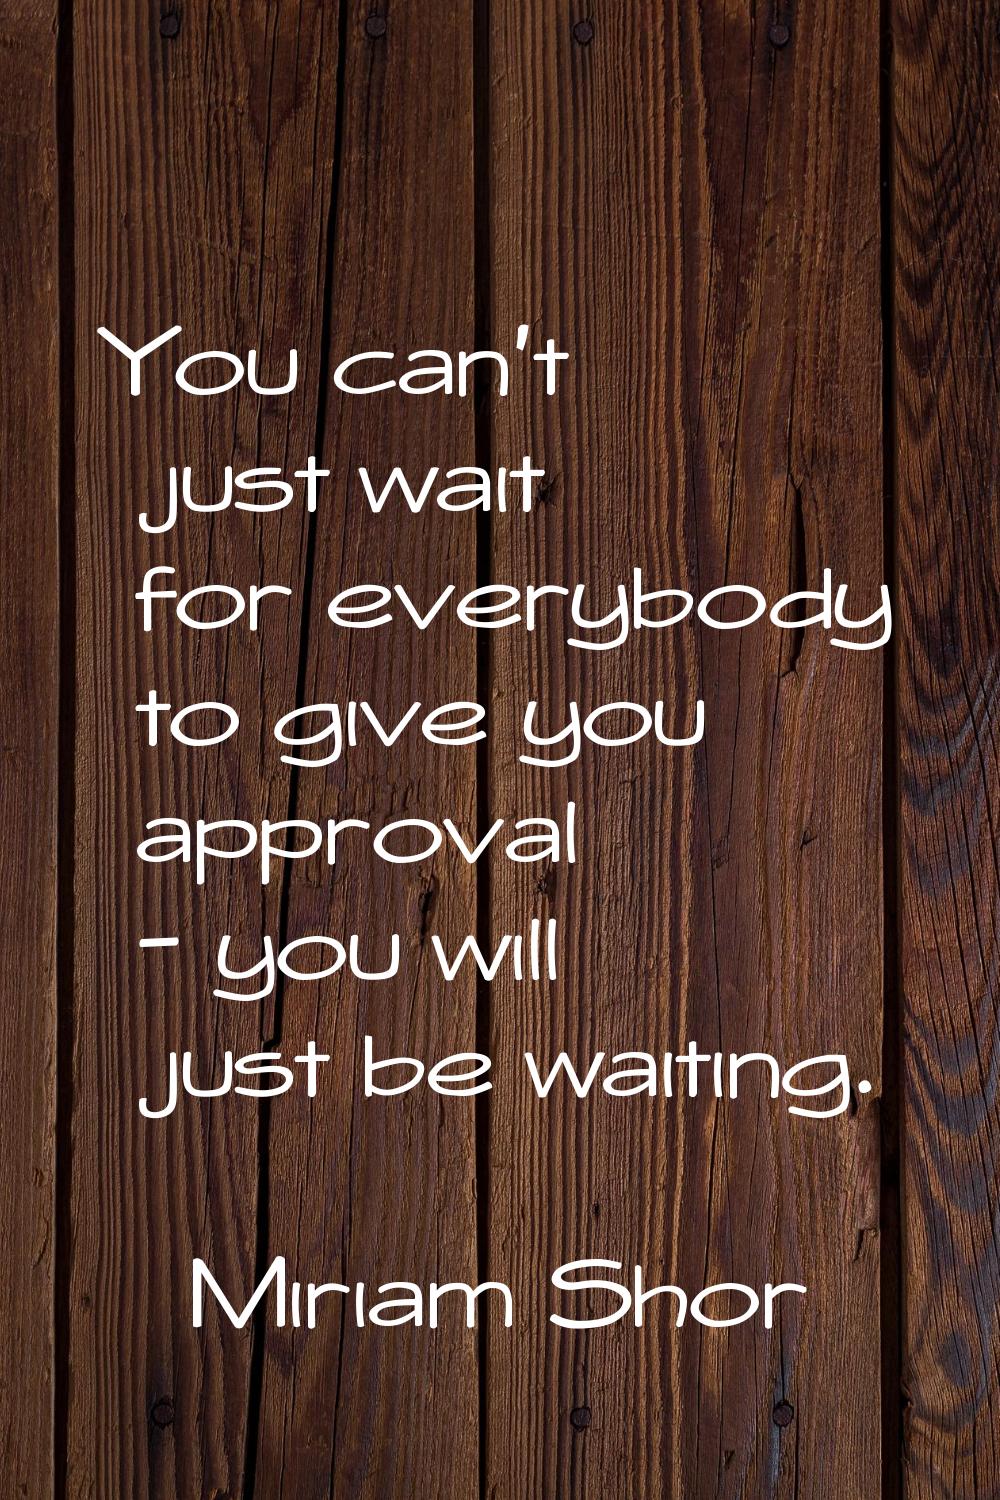 You can't just wait for everybody to give you approval - you will just be waiting.